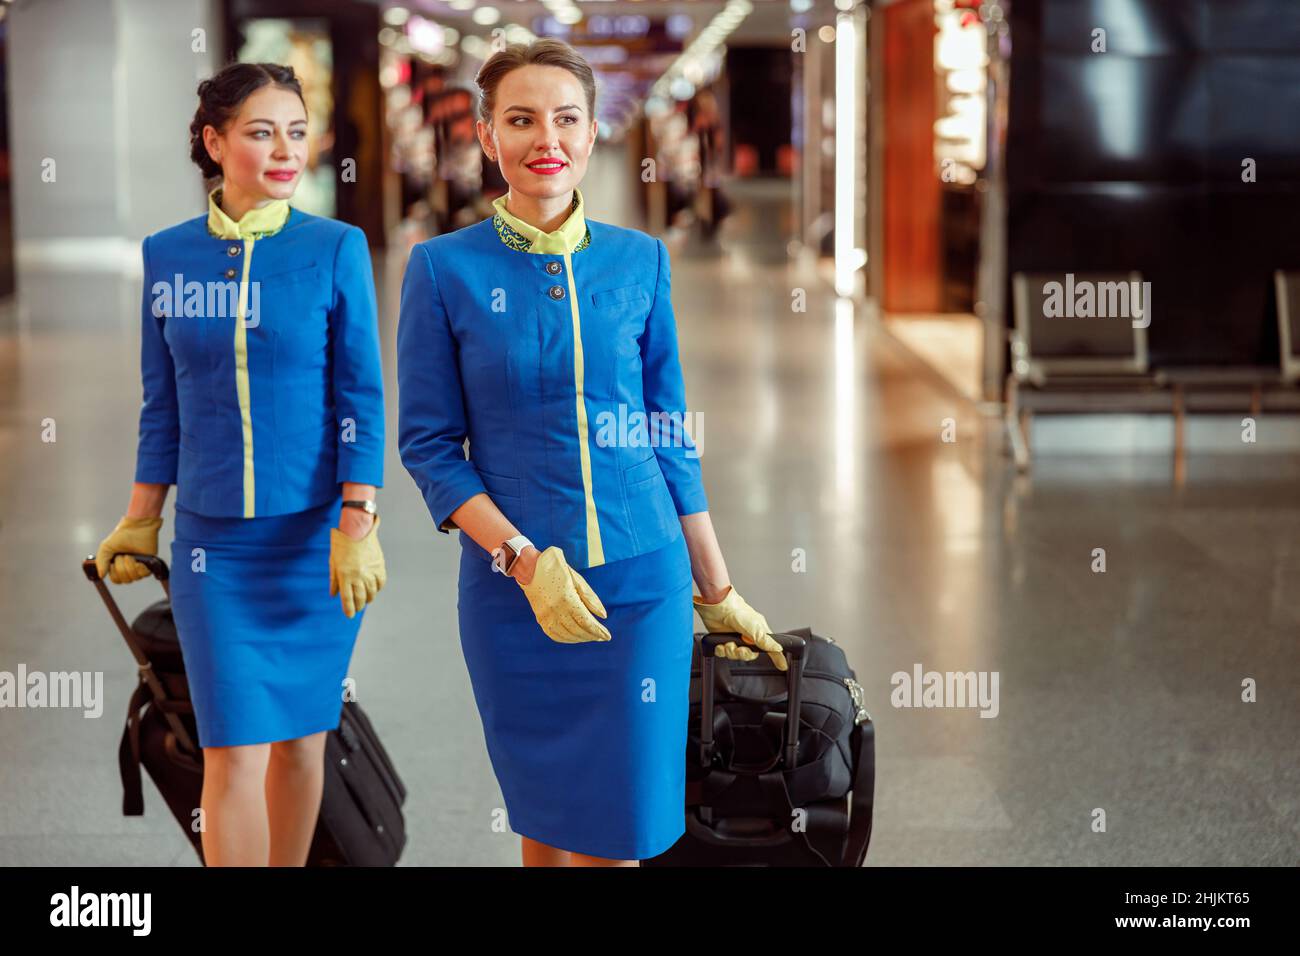 Female flight attendants carrying travel bags at airport Stock Photo